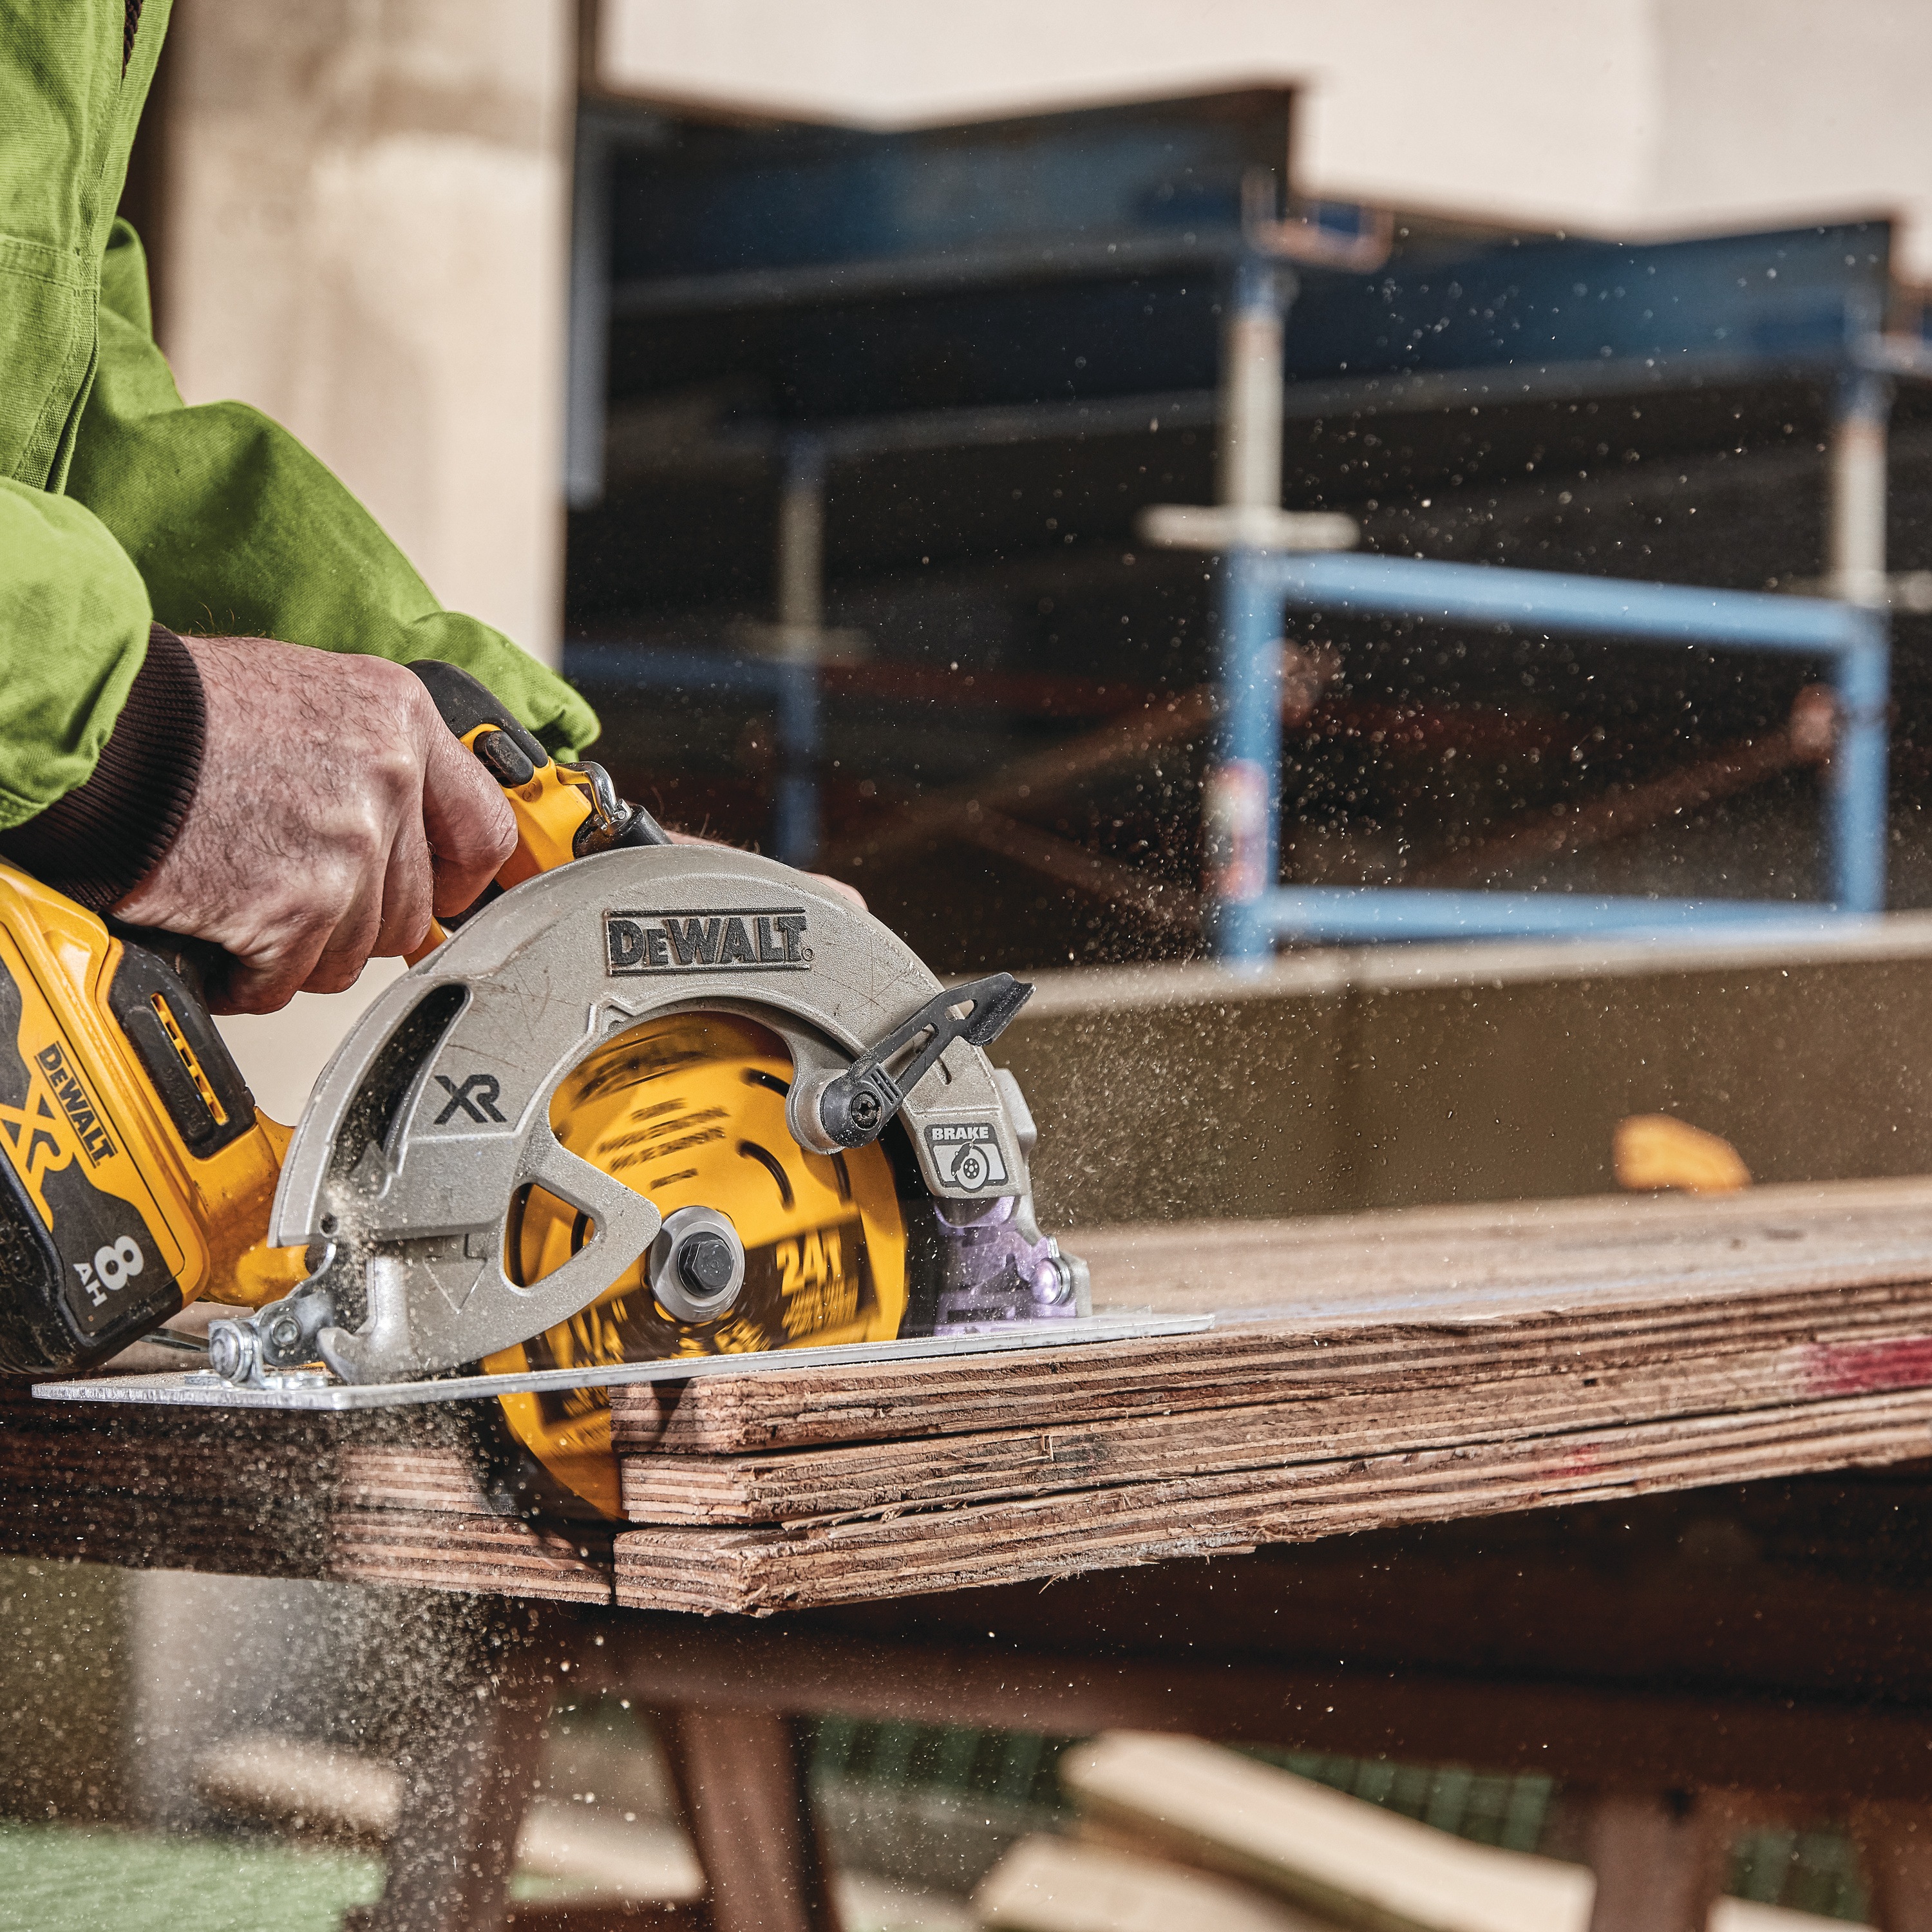 XR brushless circular saw with POWER DETECT tool technology cutting wooden boards.